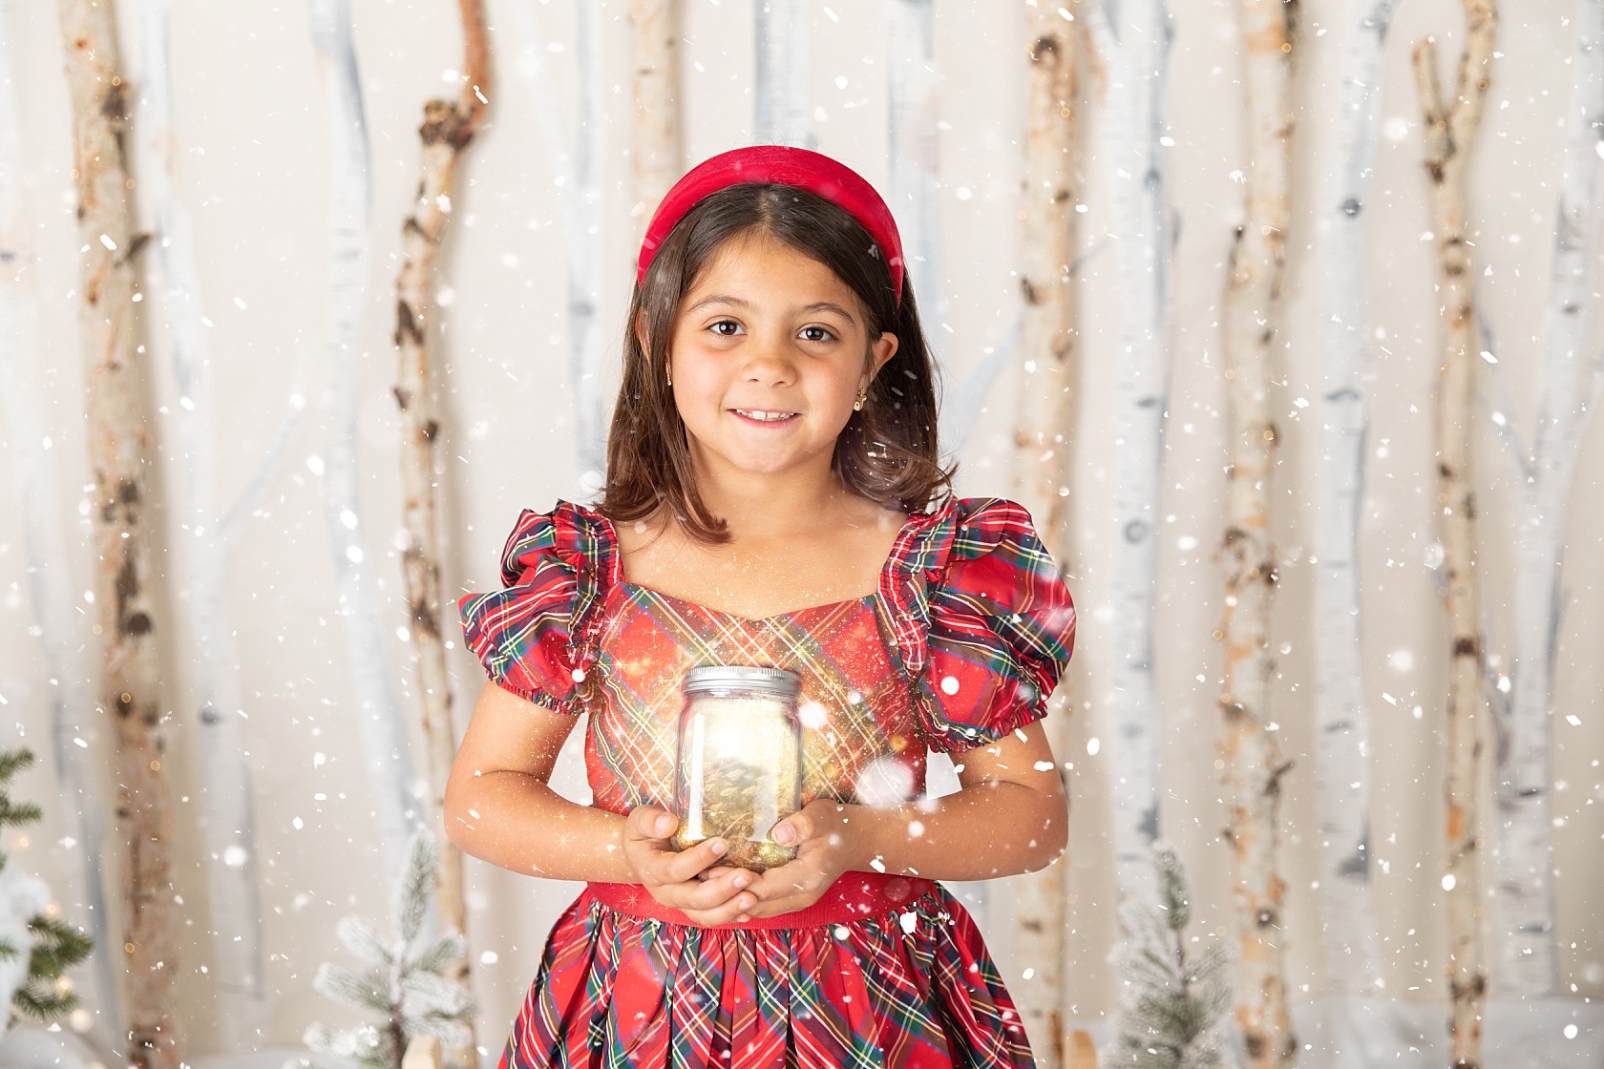  girl standing in front of birch trees and snowballs for Christmas Studio Minis Maryland